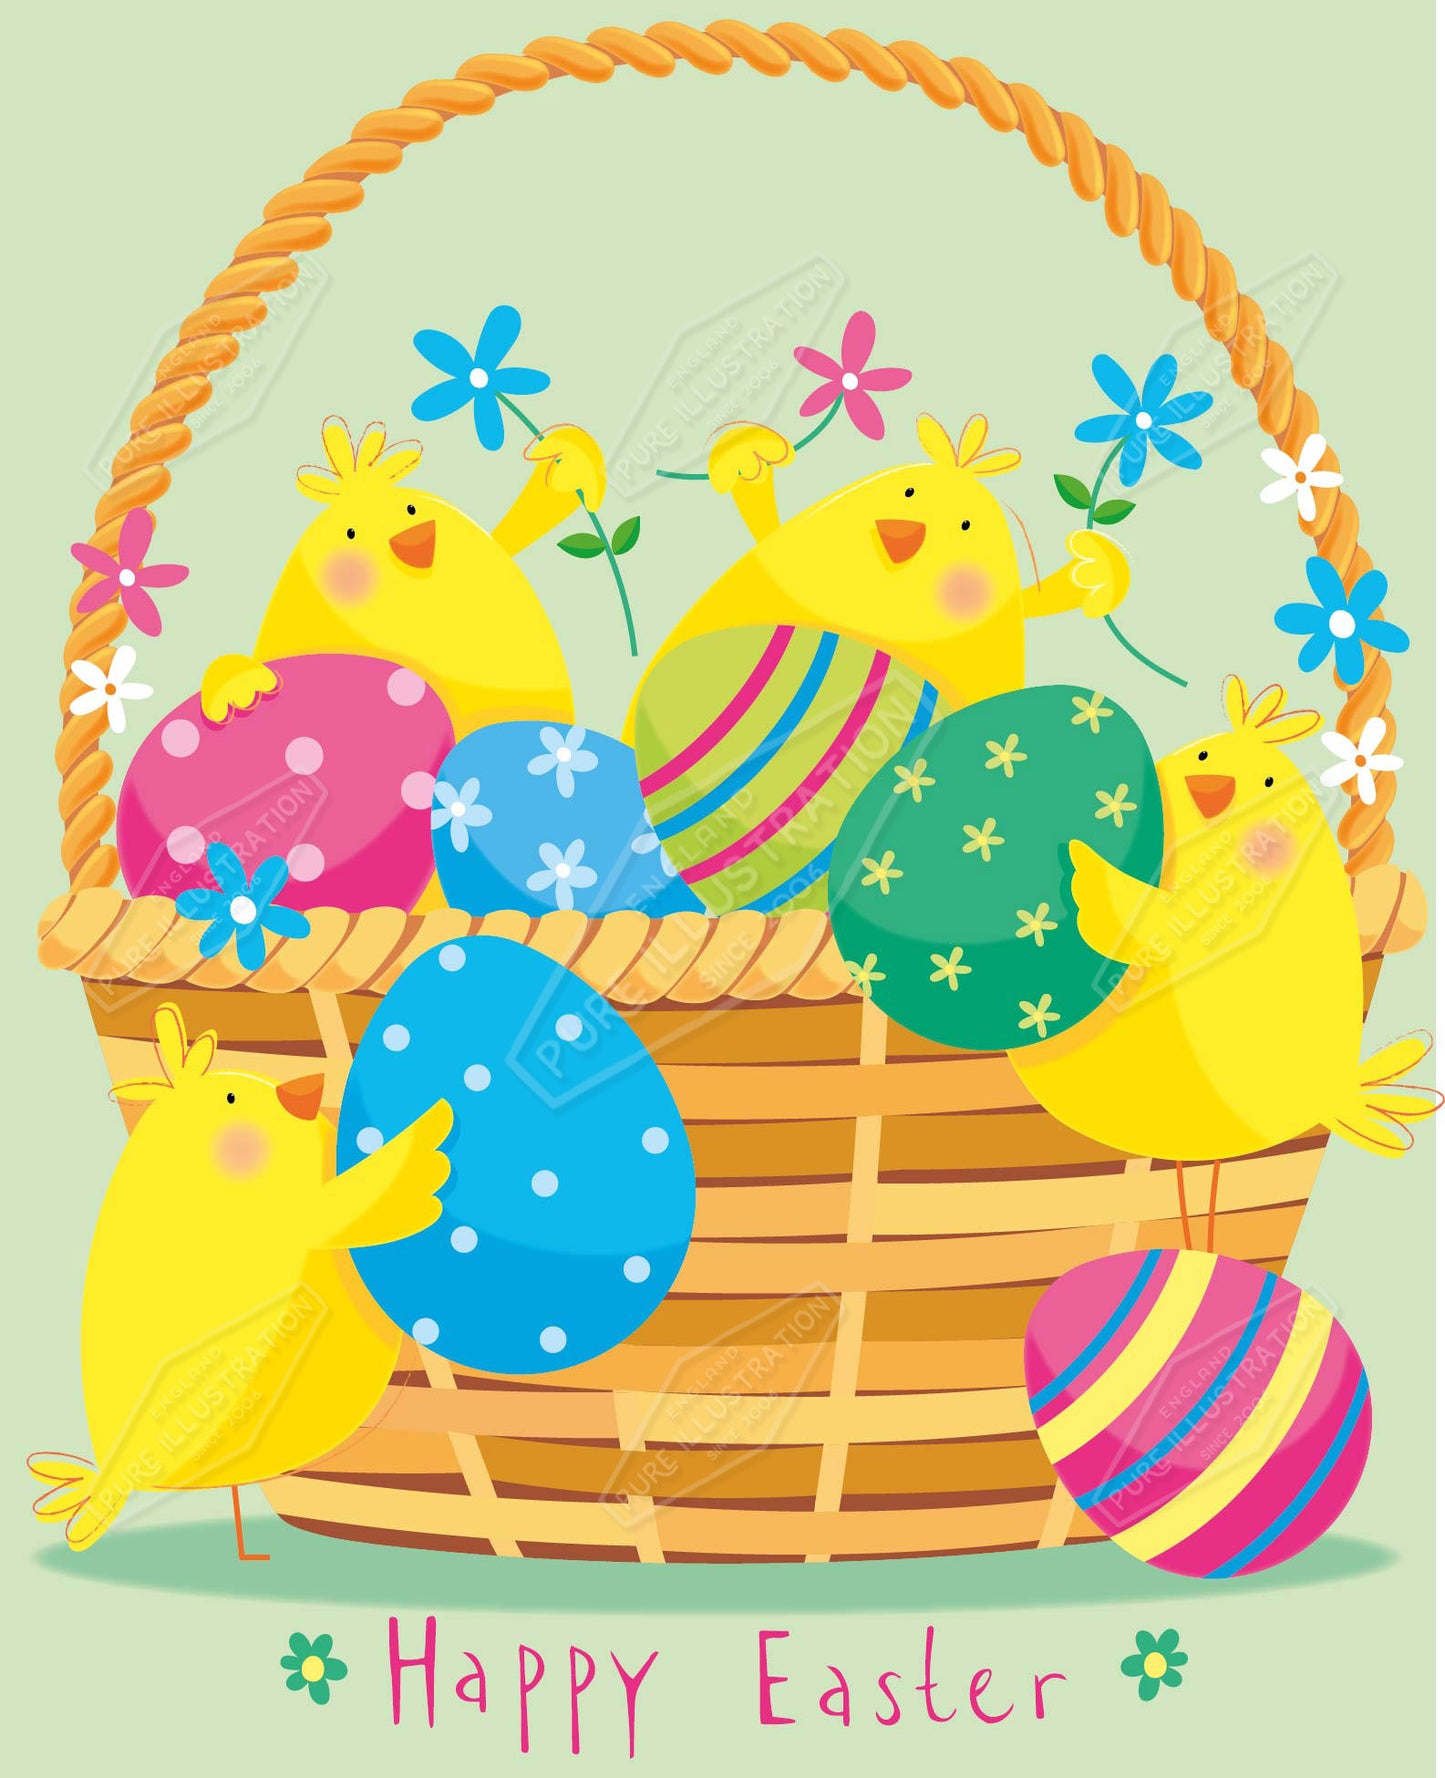 00035132SPI- Sarah Pitt is represented by Pure Art Licensing Agency - Easter Greeting Card Design